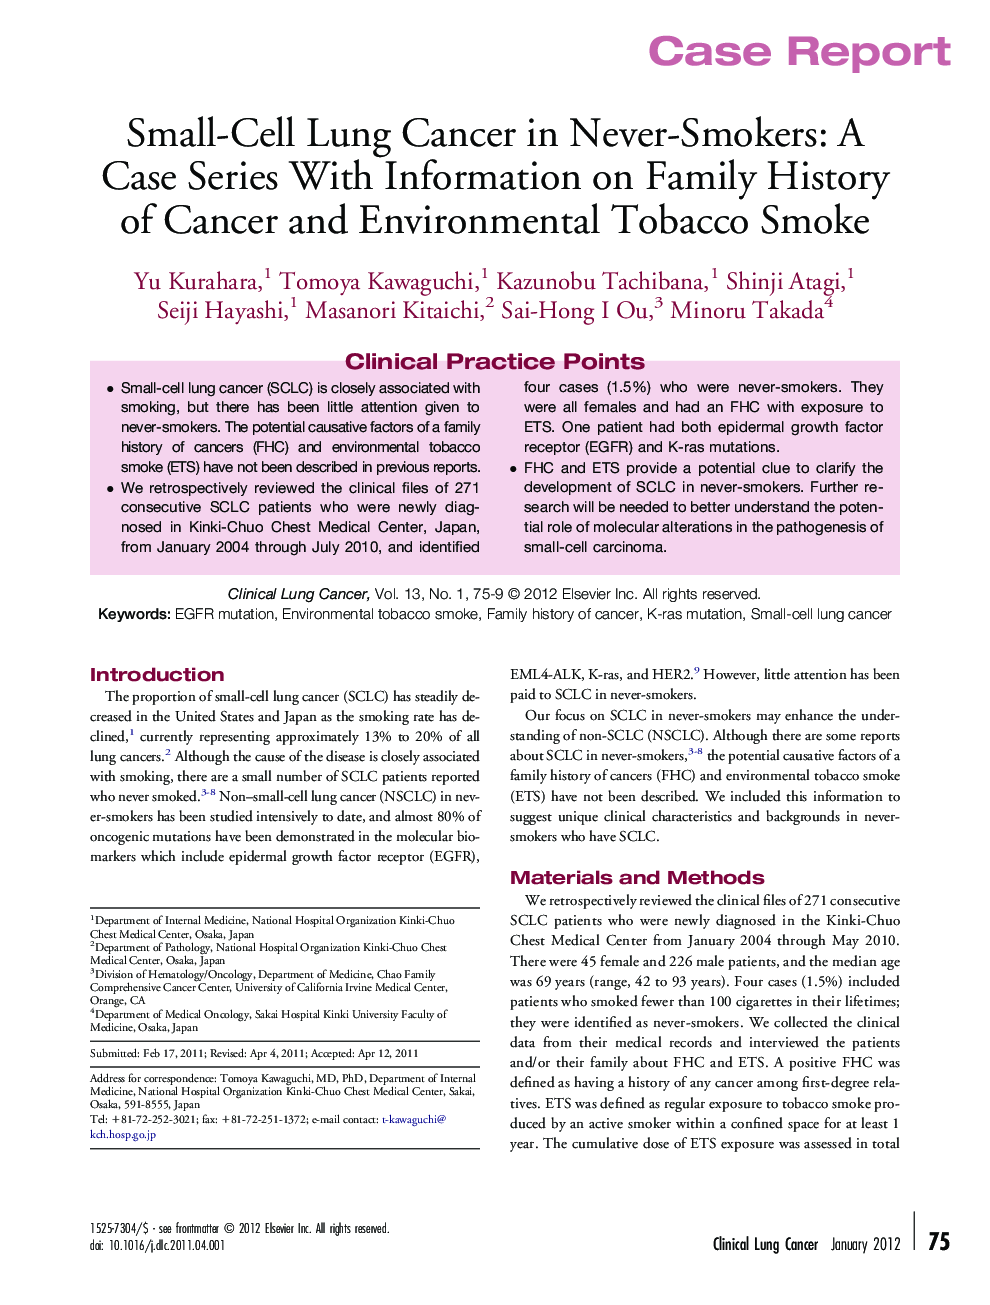 Small-Cell Lung Cancer in Never-Smokers: A Case Series With Information on Family History of Cancer and Environmental Tobacco Smoke